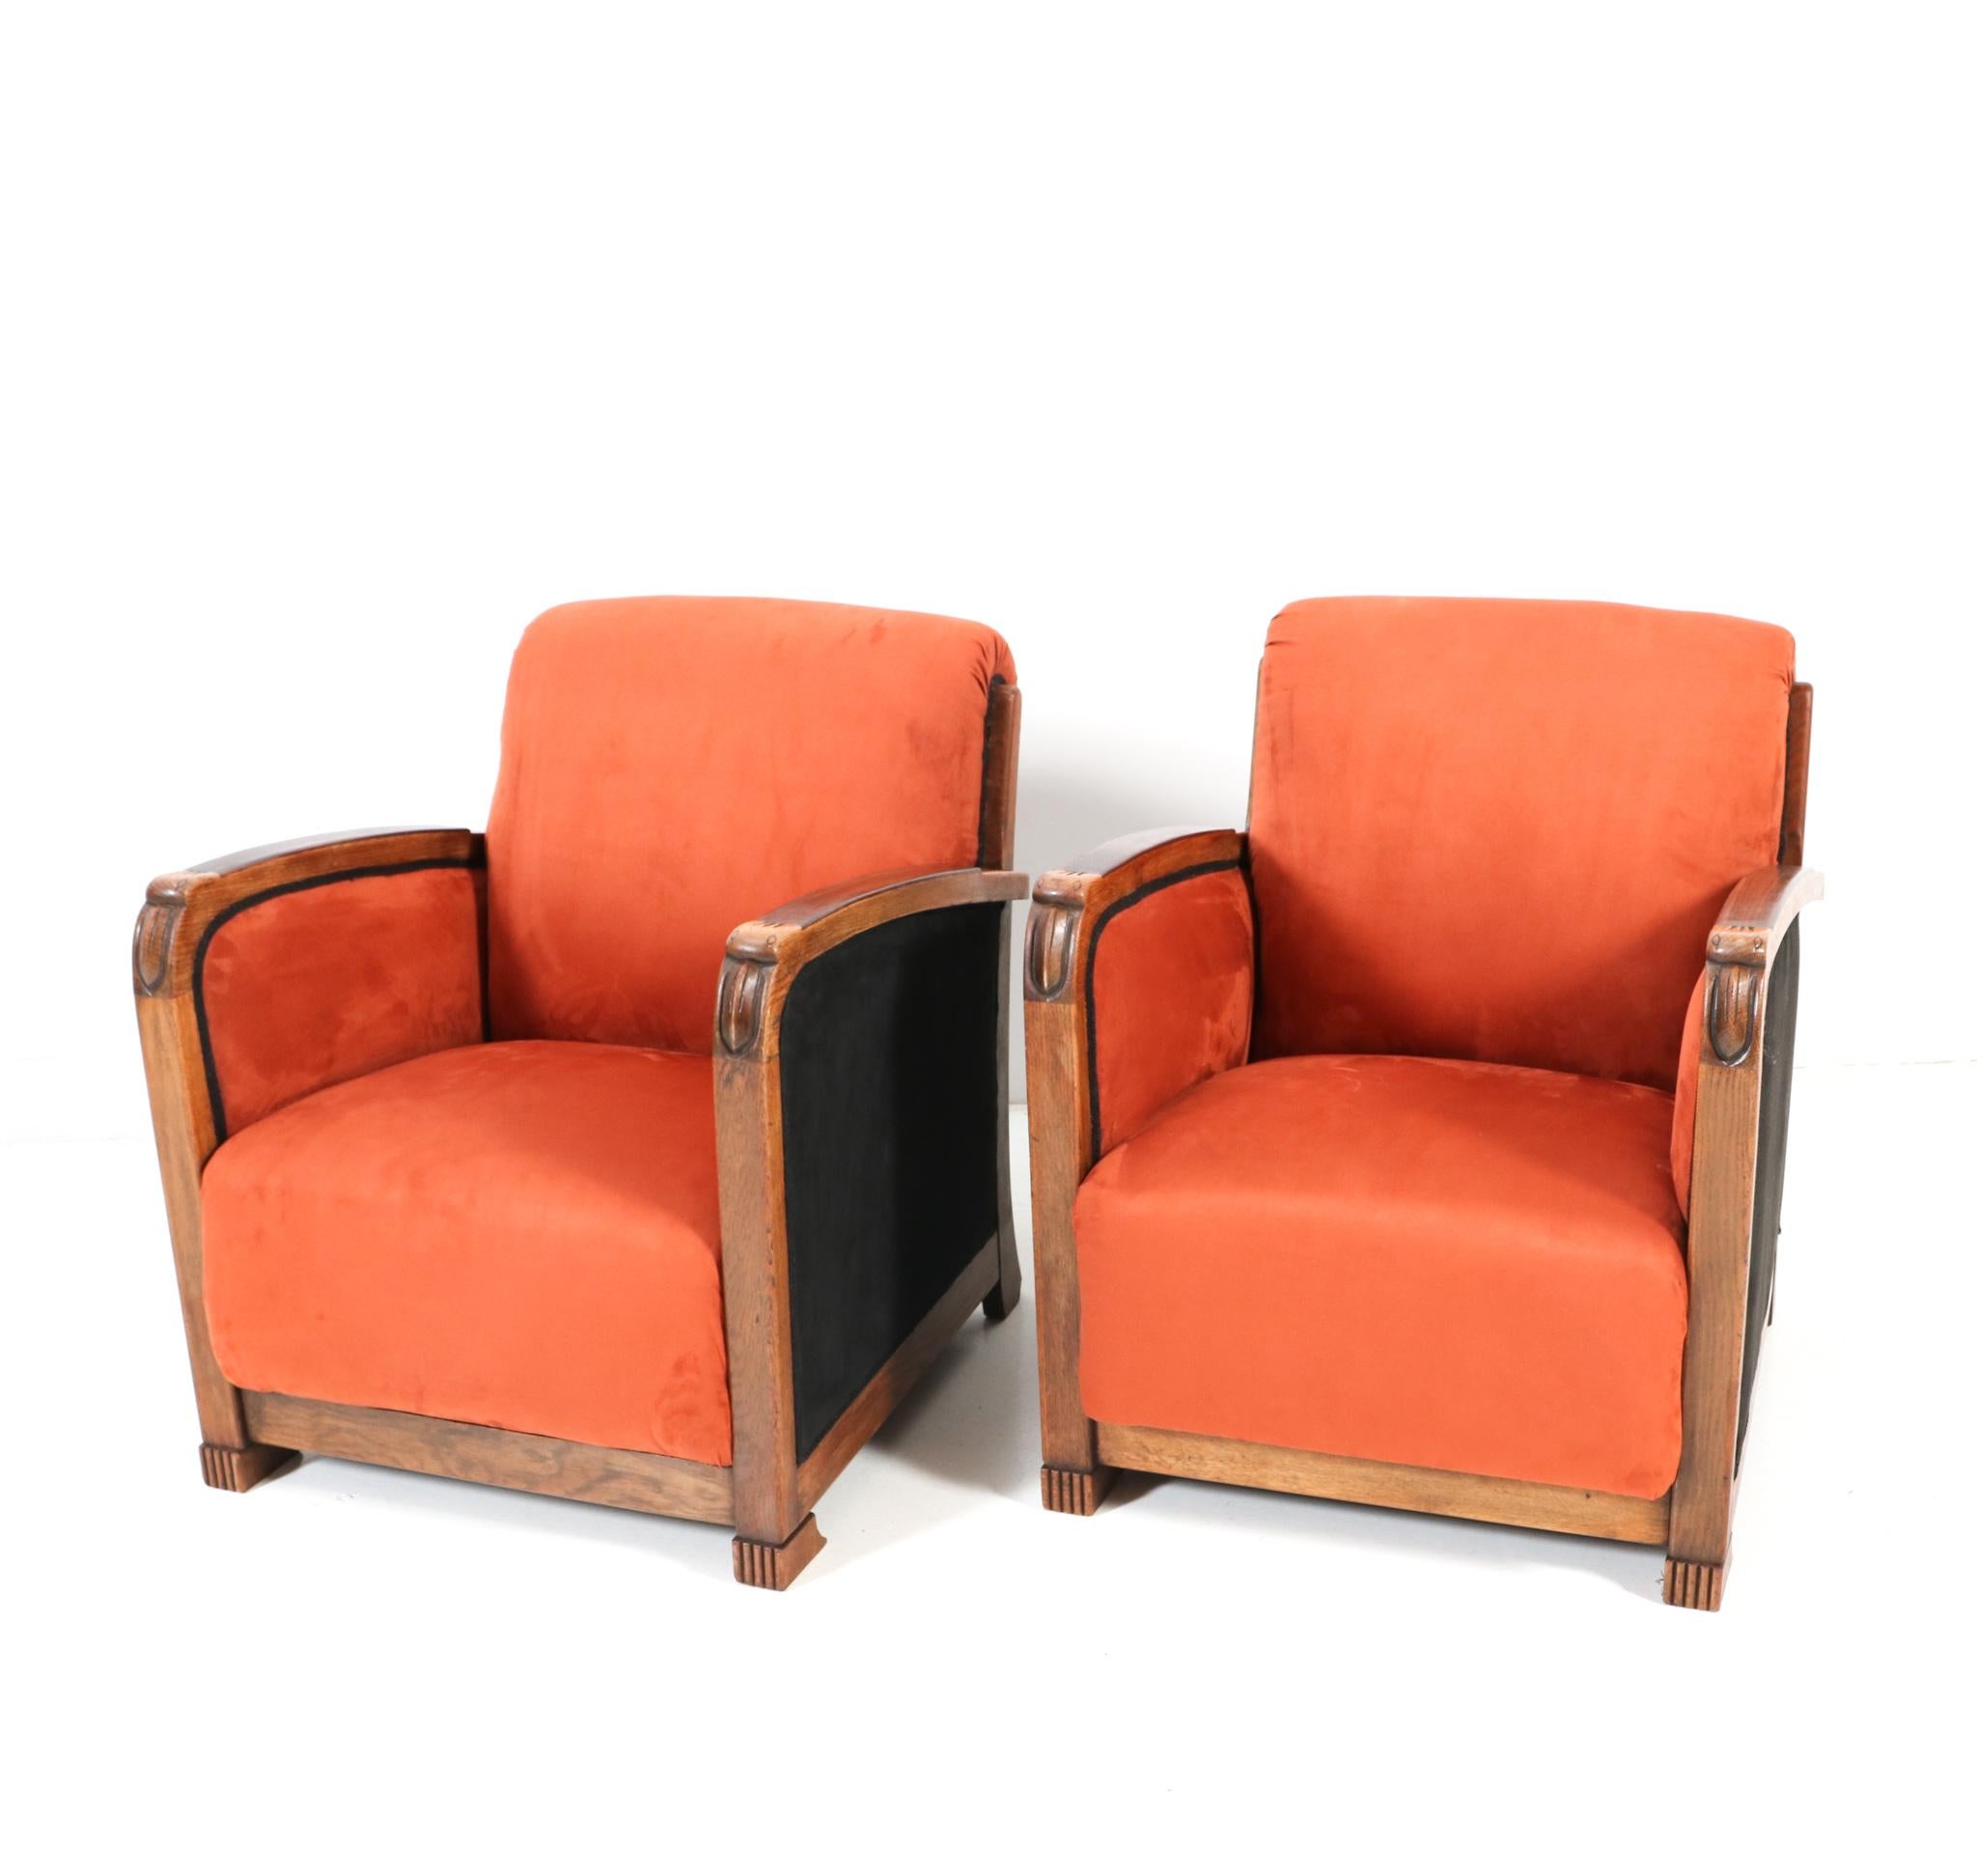 Stunning and rare pair of Art Deco Amsterdamse School lounge chairs.
Striking Dutch design from the 1920s.
Solid oak frames with solid macassar ebony armrests.
Original hand-carved stylish birds at the end of the armrests.
Re-upholstered with a